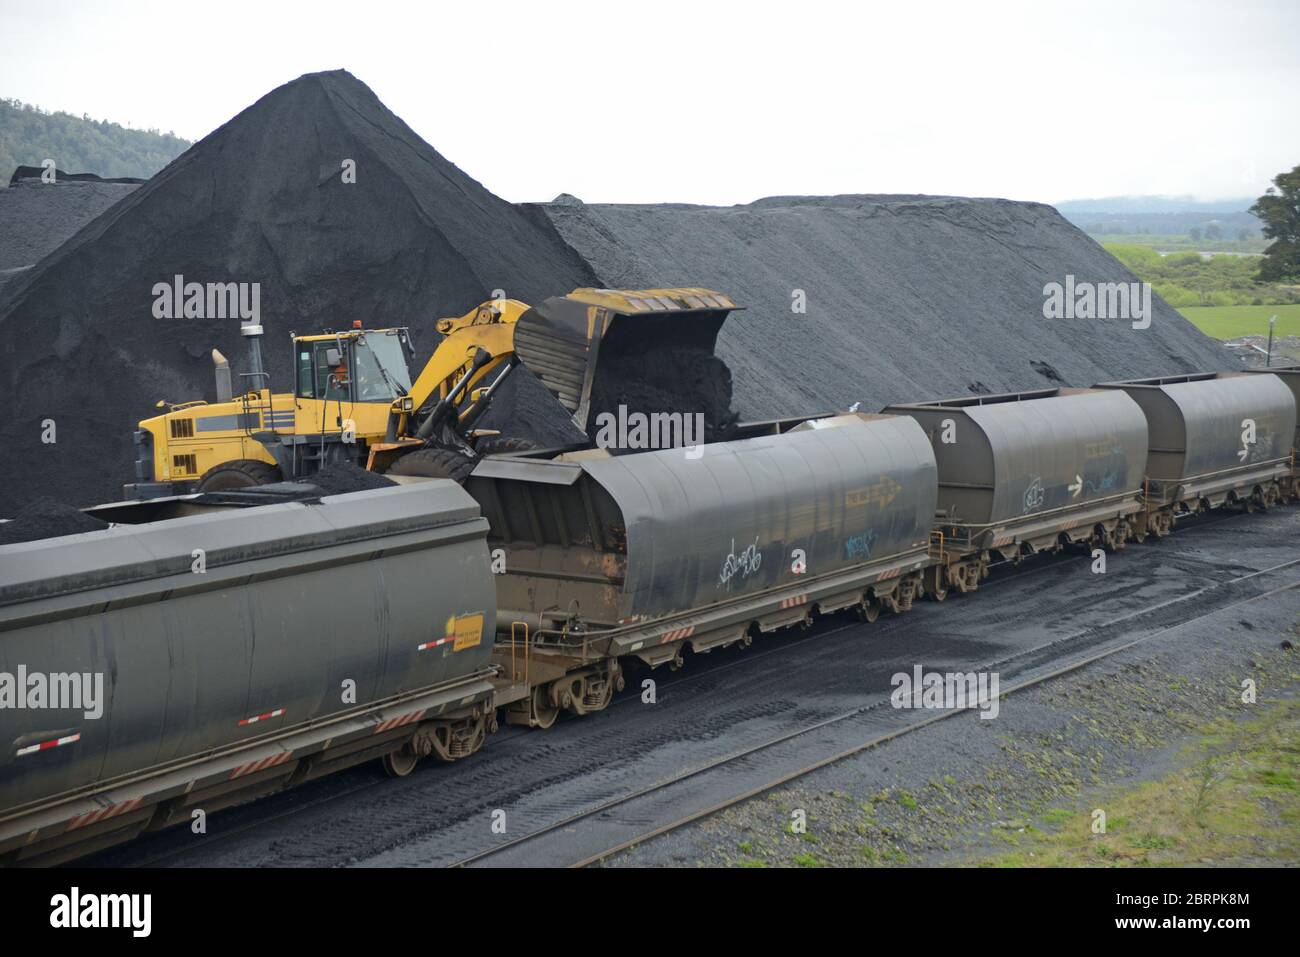 A payloader fills train wagons with coal at a railway siding Stock Photo